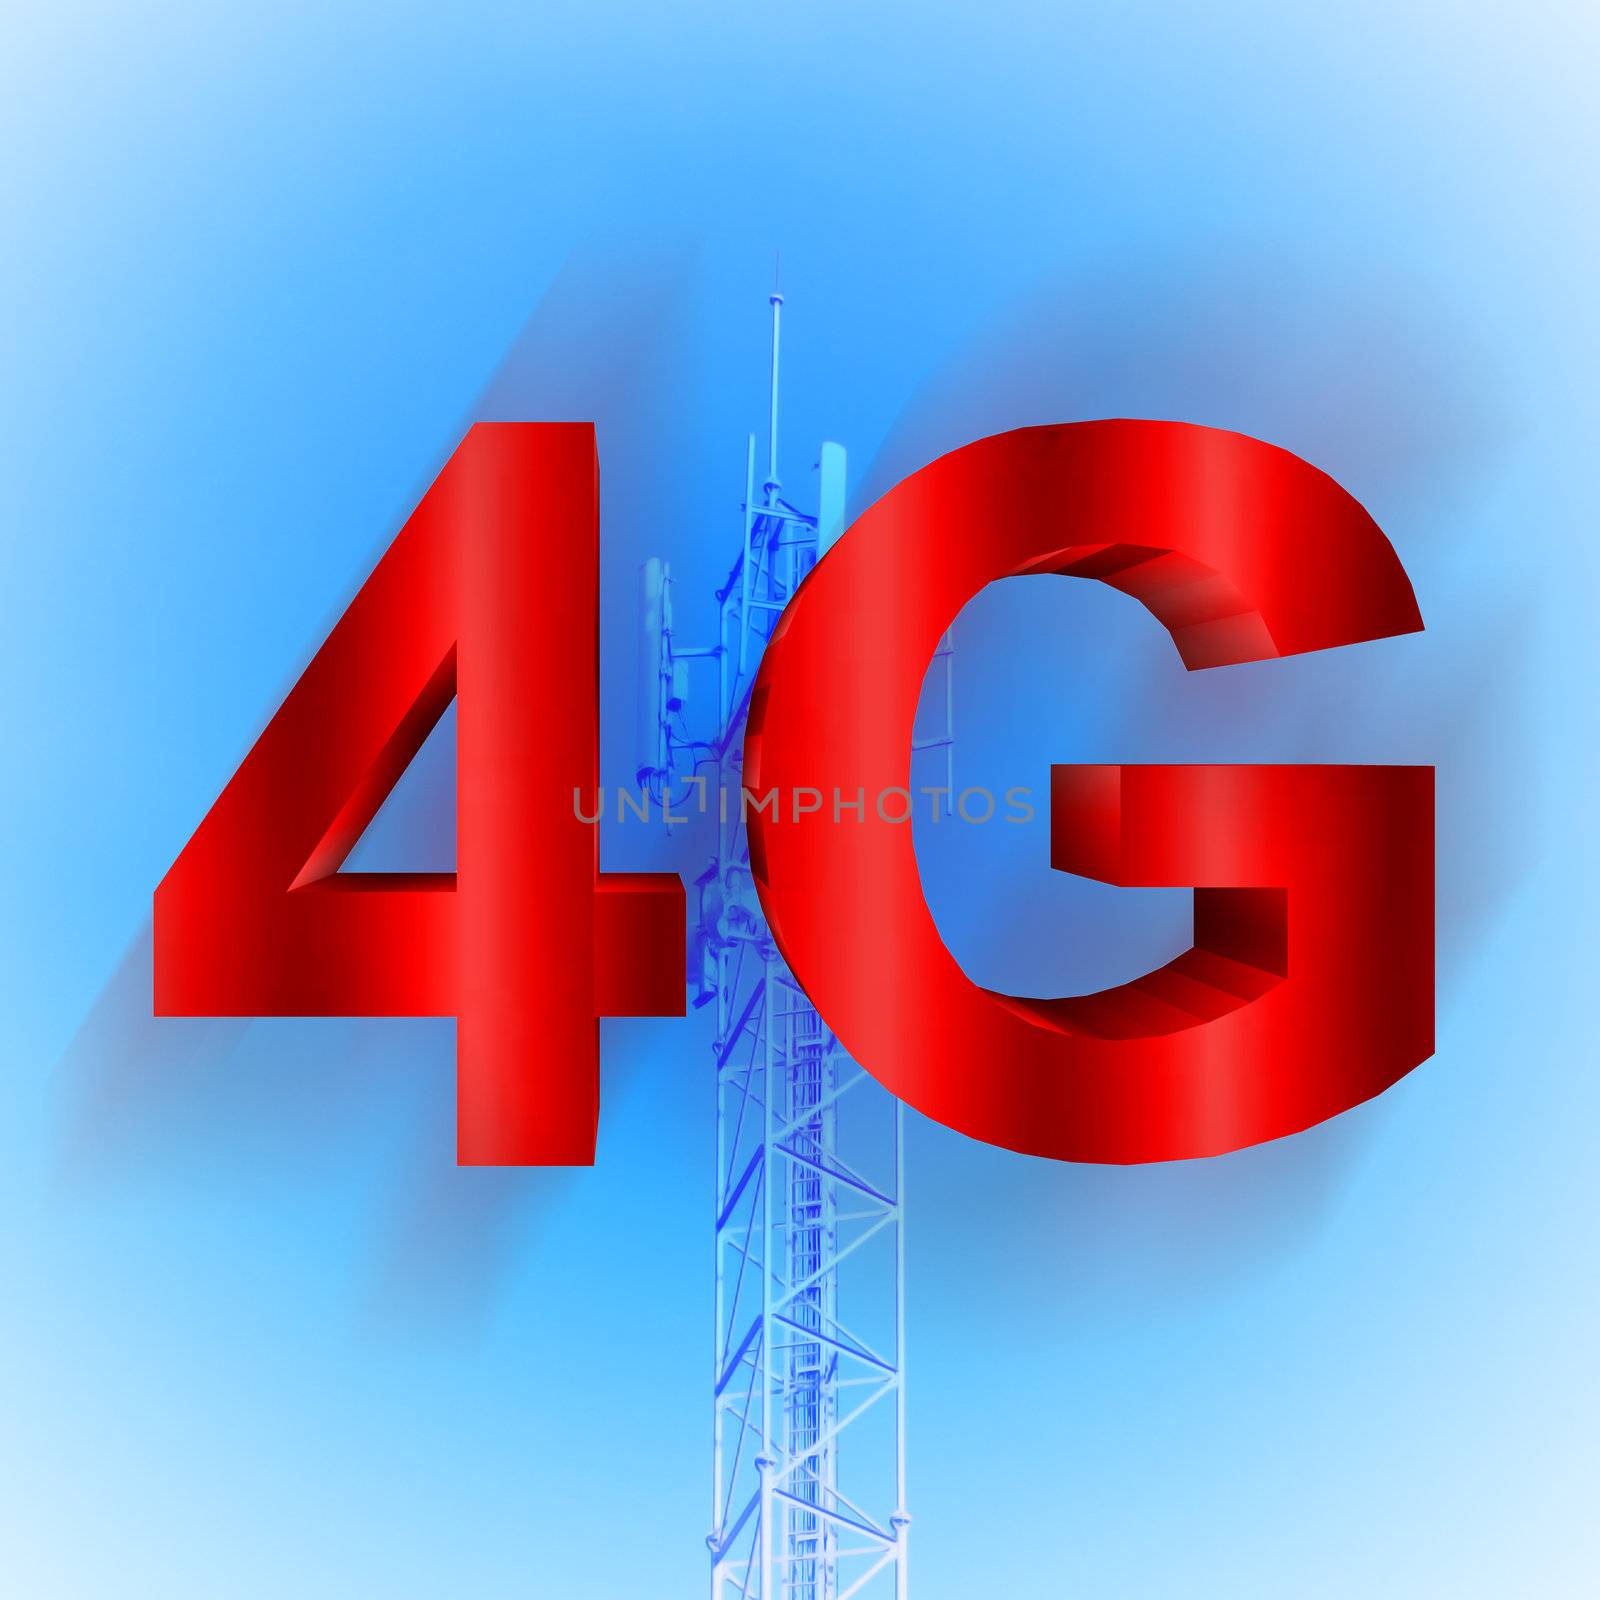 4G symbol with mobile telecommunication tower background